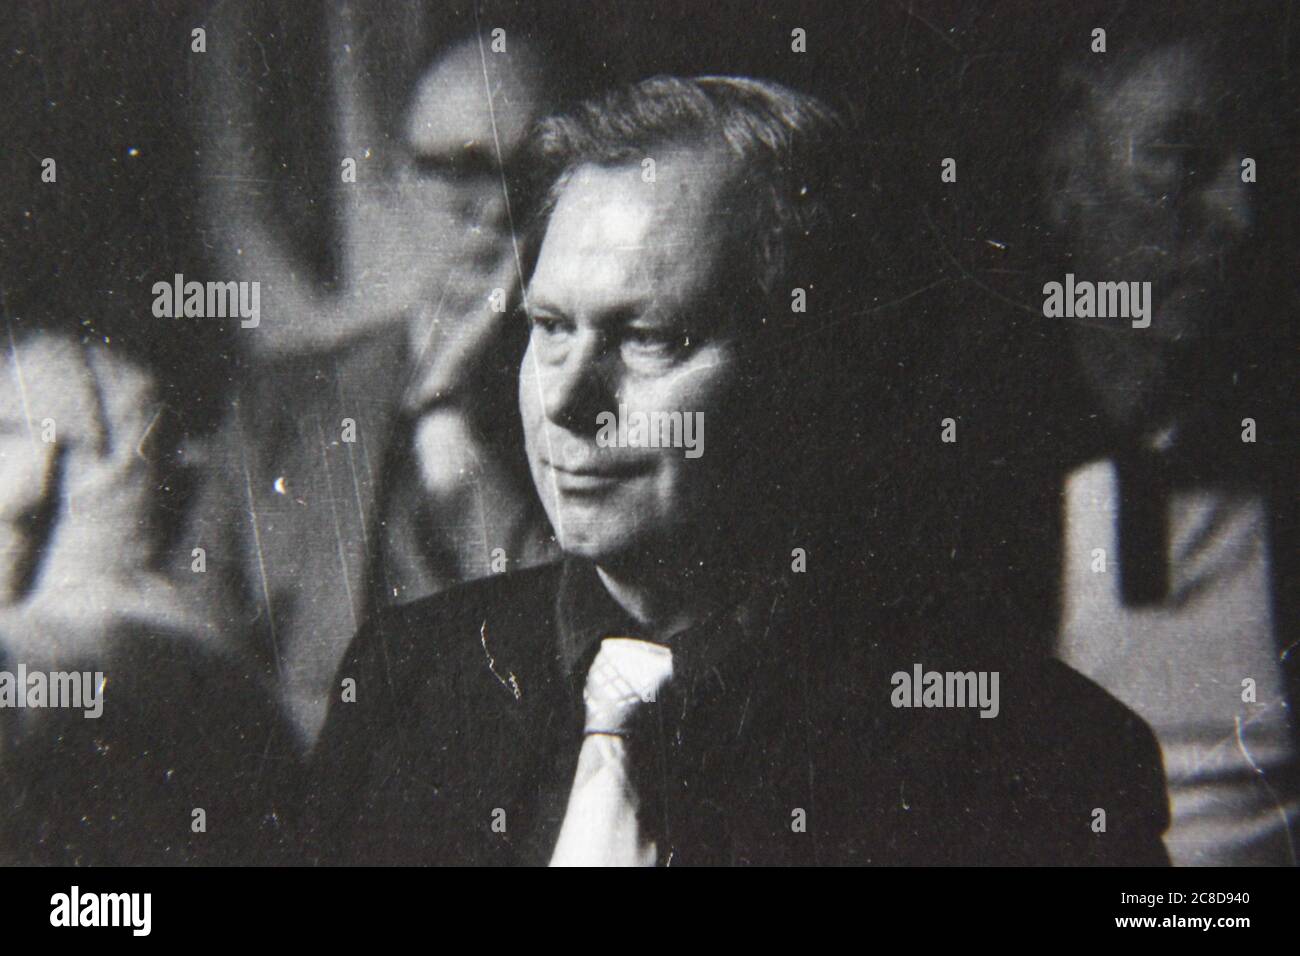 Fine 70s vintage black and white lifestyle photography of an angry european man. Stock Photo